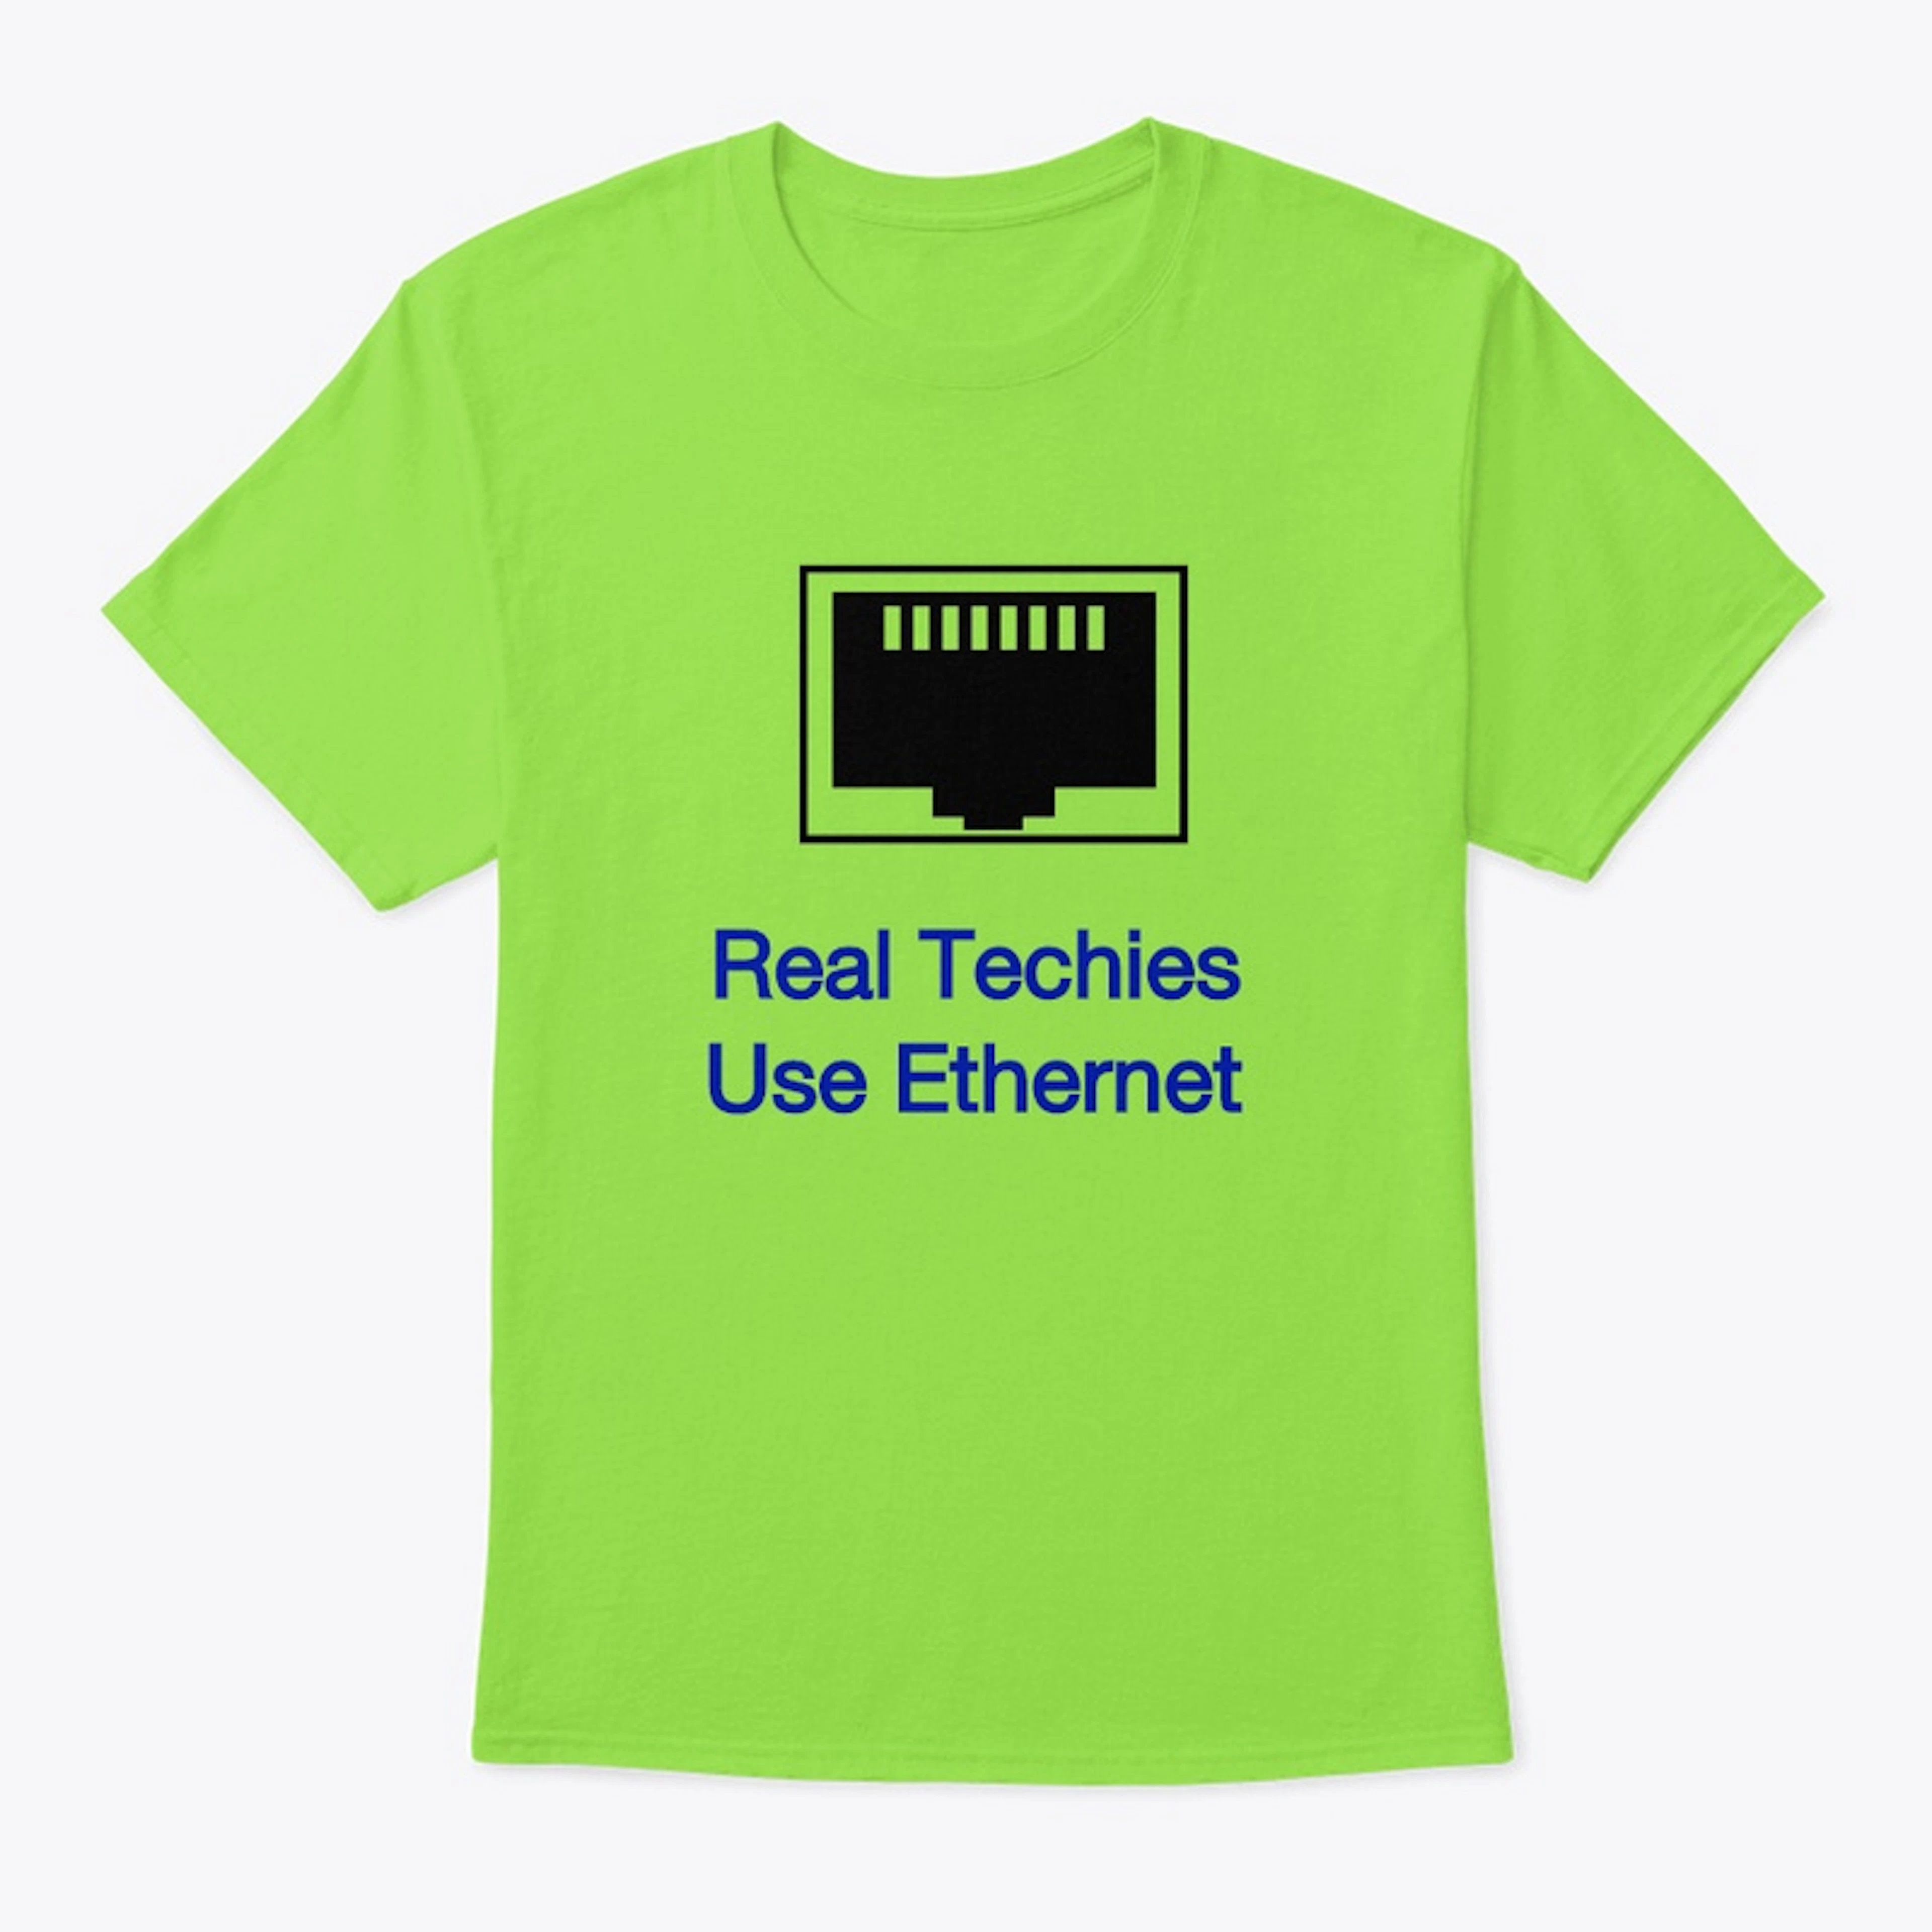 Real Techies use Ethernet